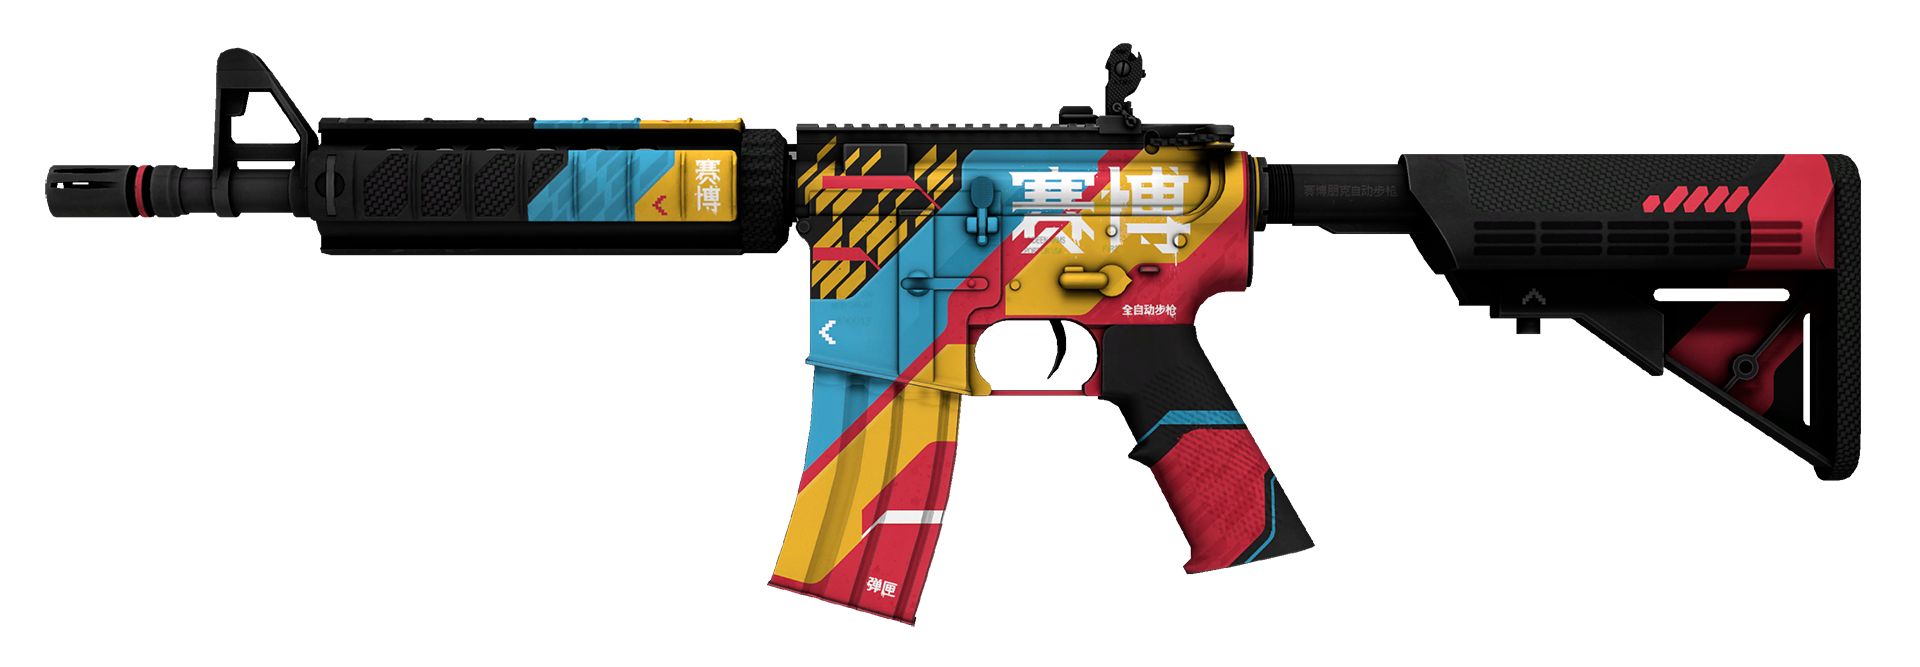 M4A4 Cyber Security Large Rendering